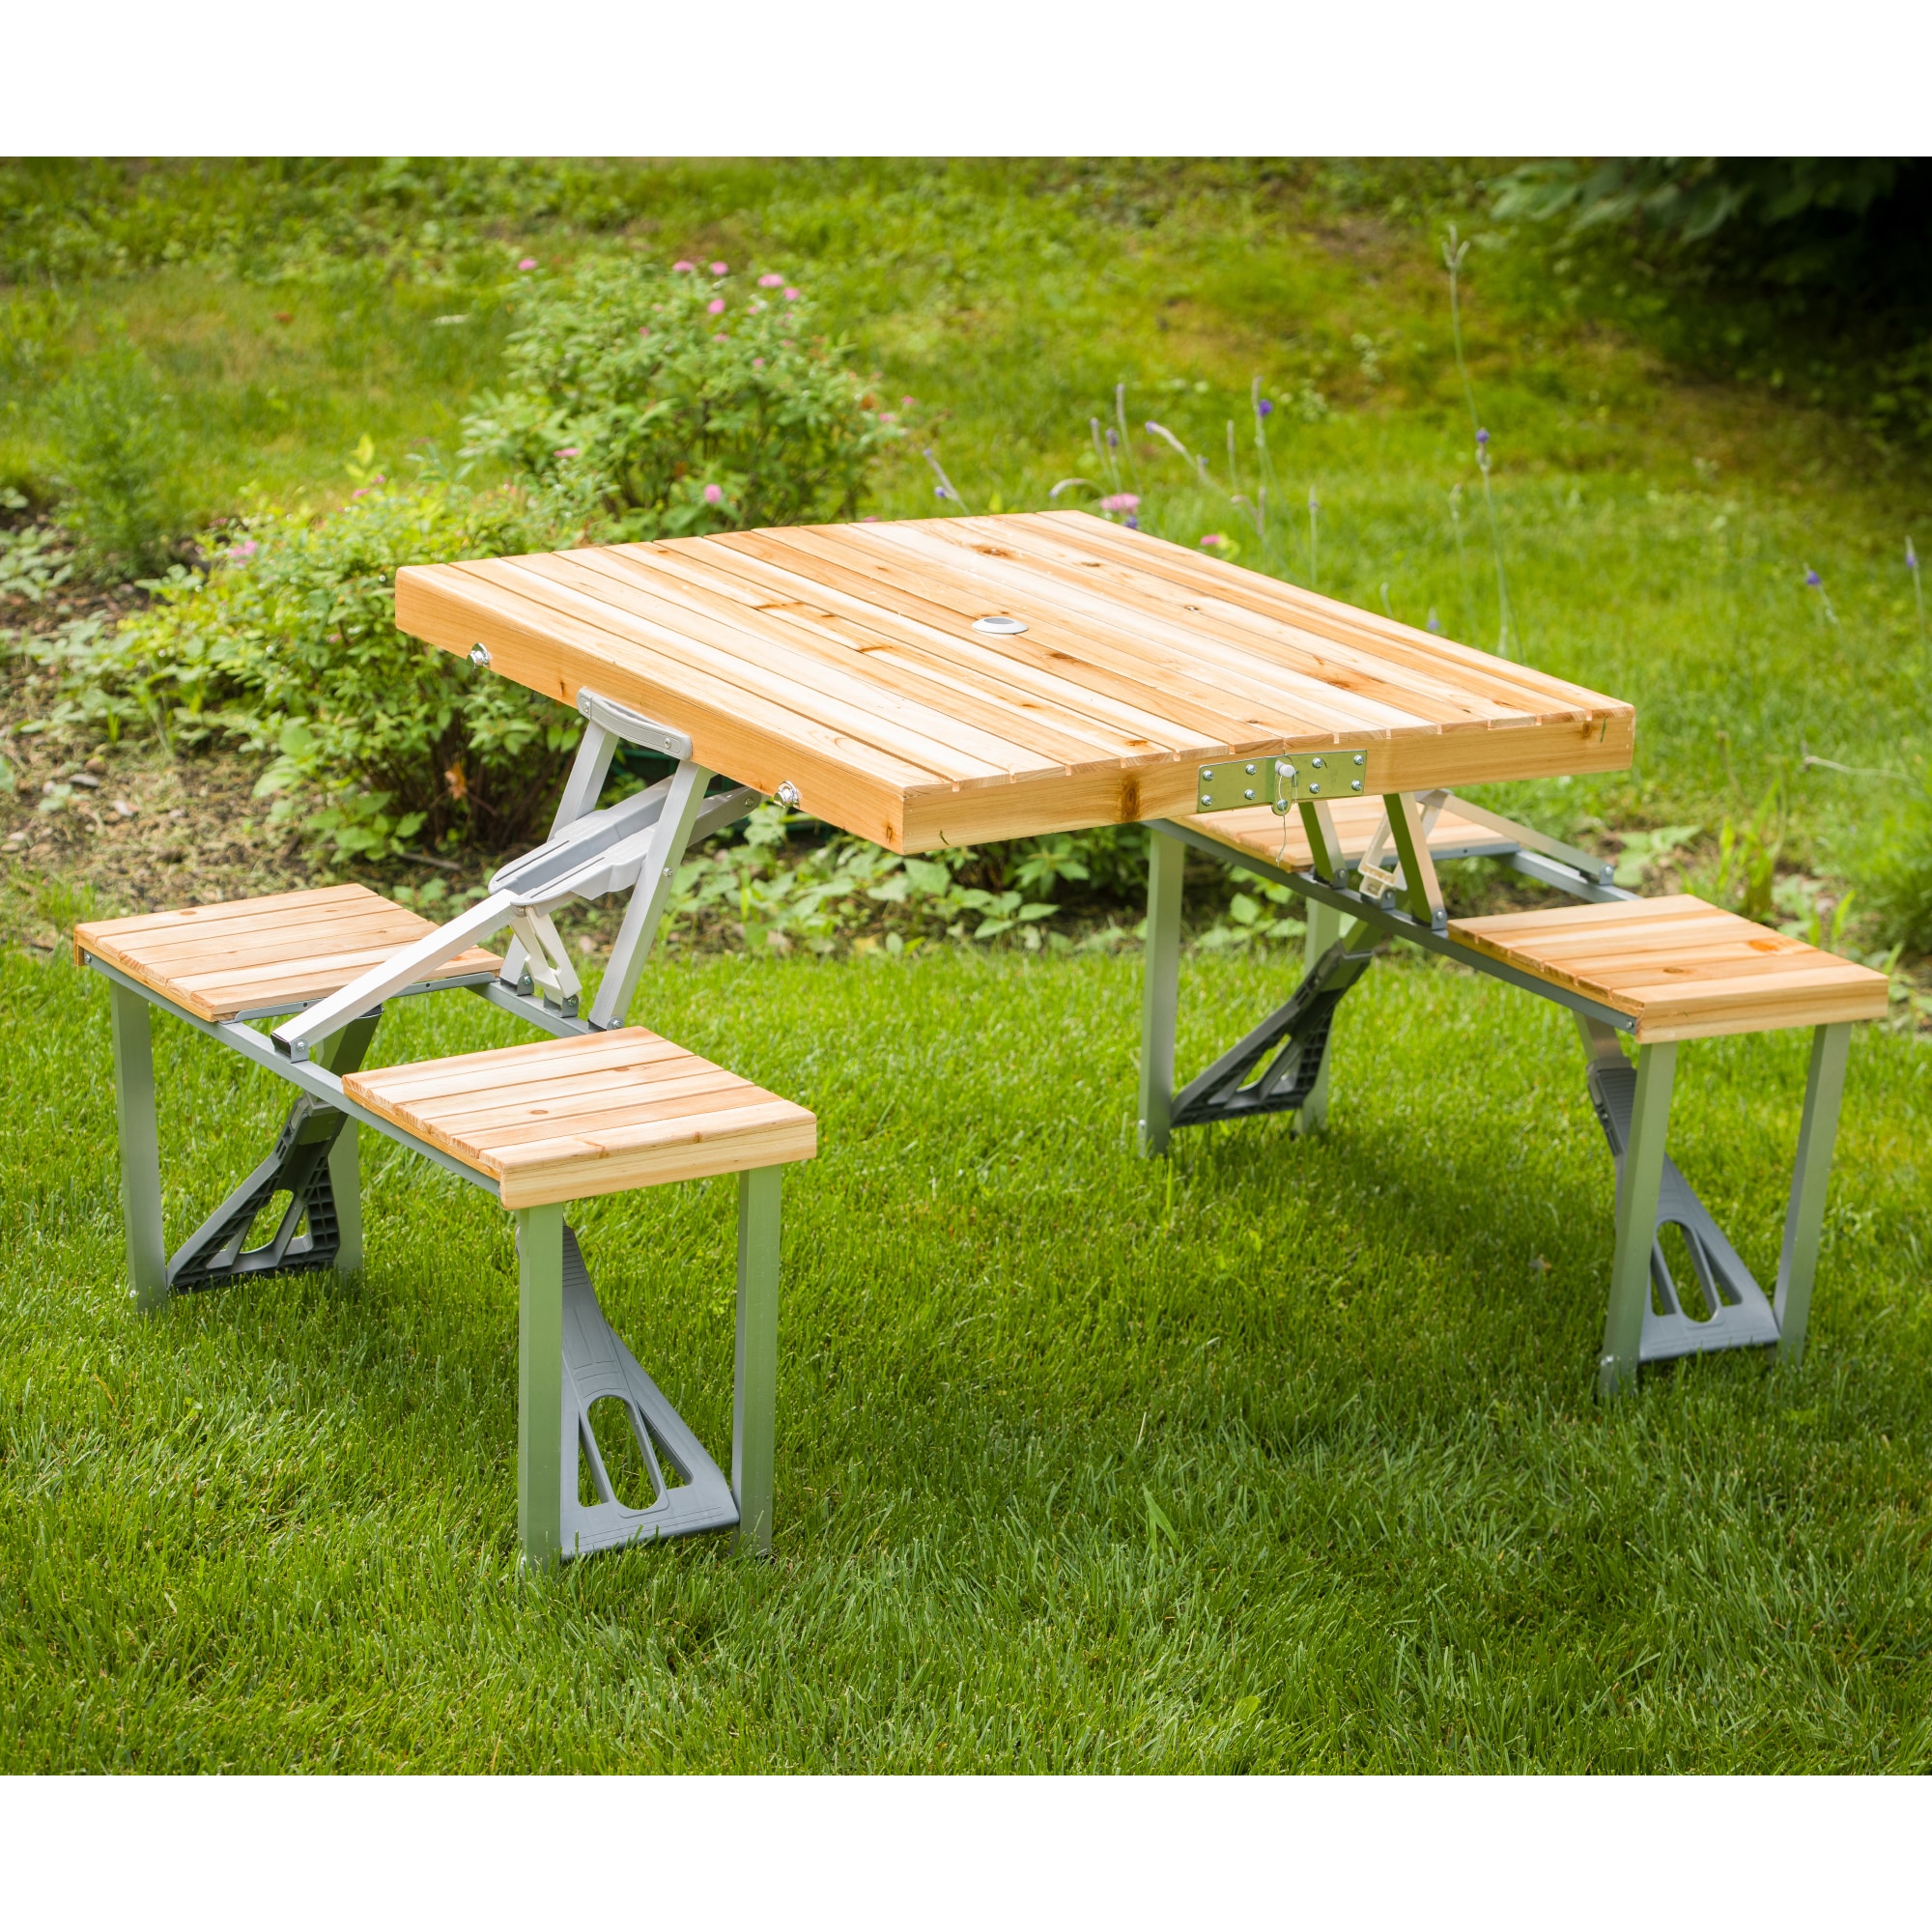 8 Ft. Heavy Duty Wood Picnic Table - Furniture Leisure